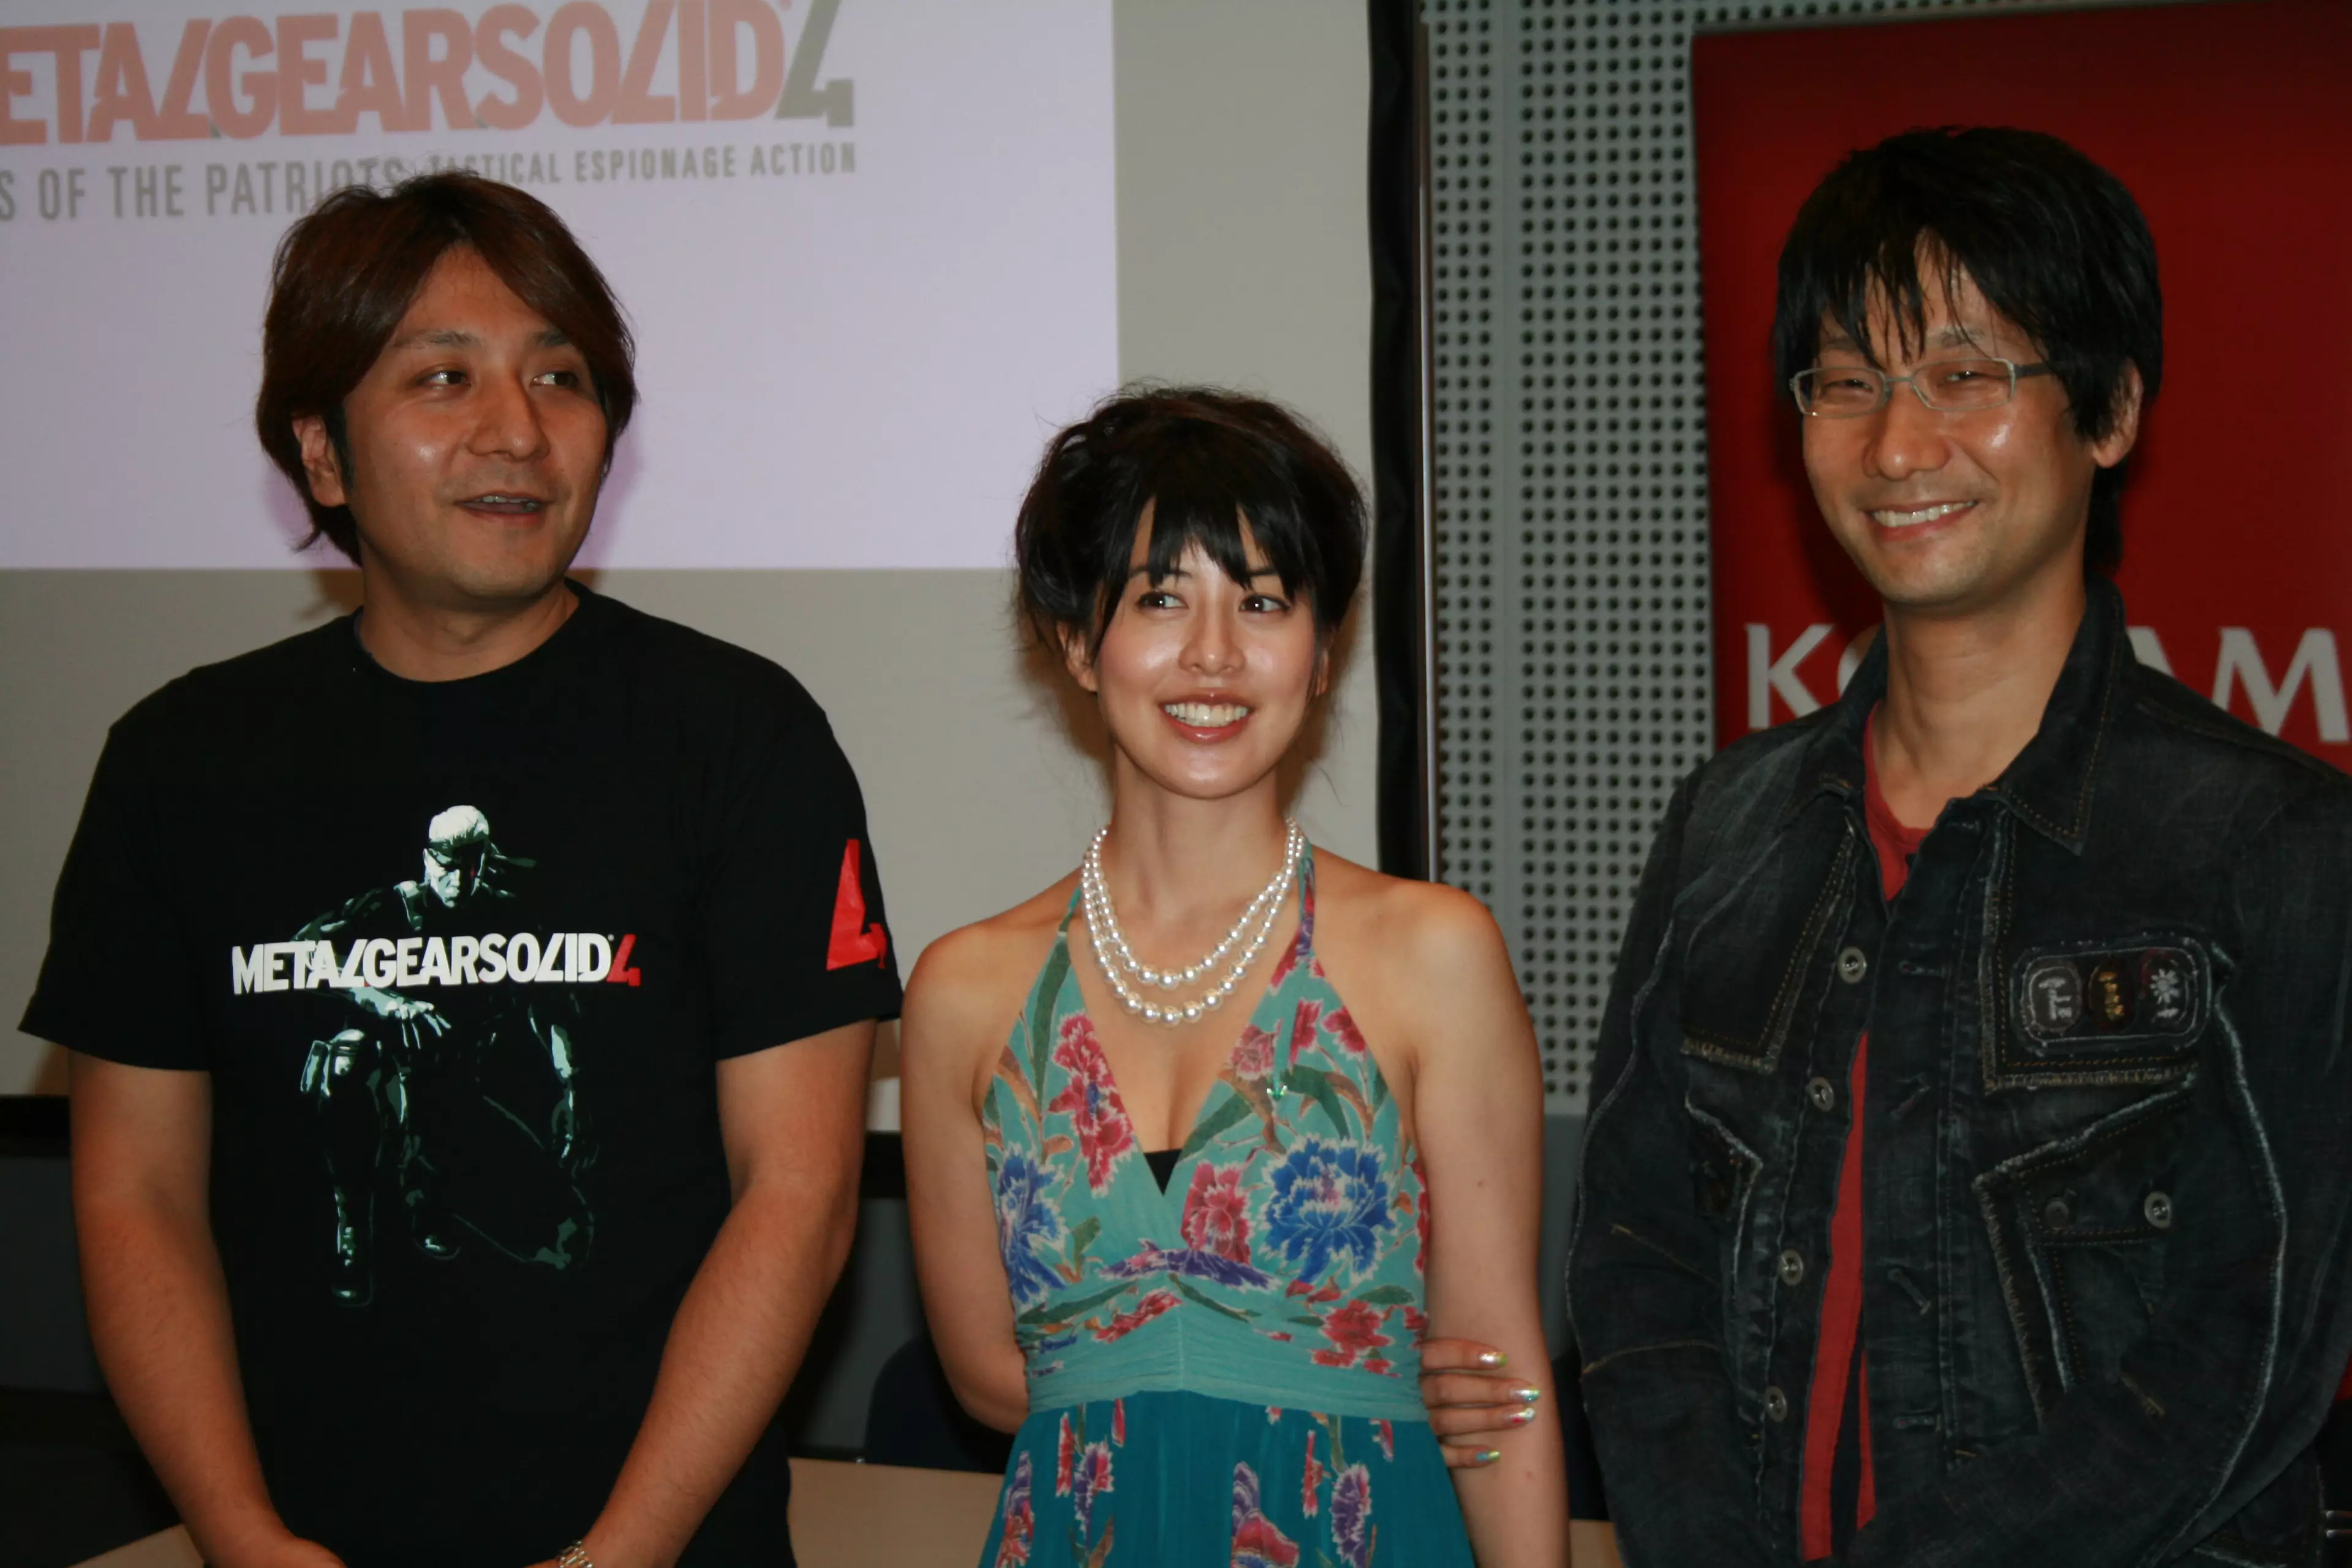 Imaizumi (left) and Hideo Kojima (right) promoting Metal Gear Solid 4 / Photo: Creative Commons, Wikipedia